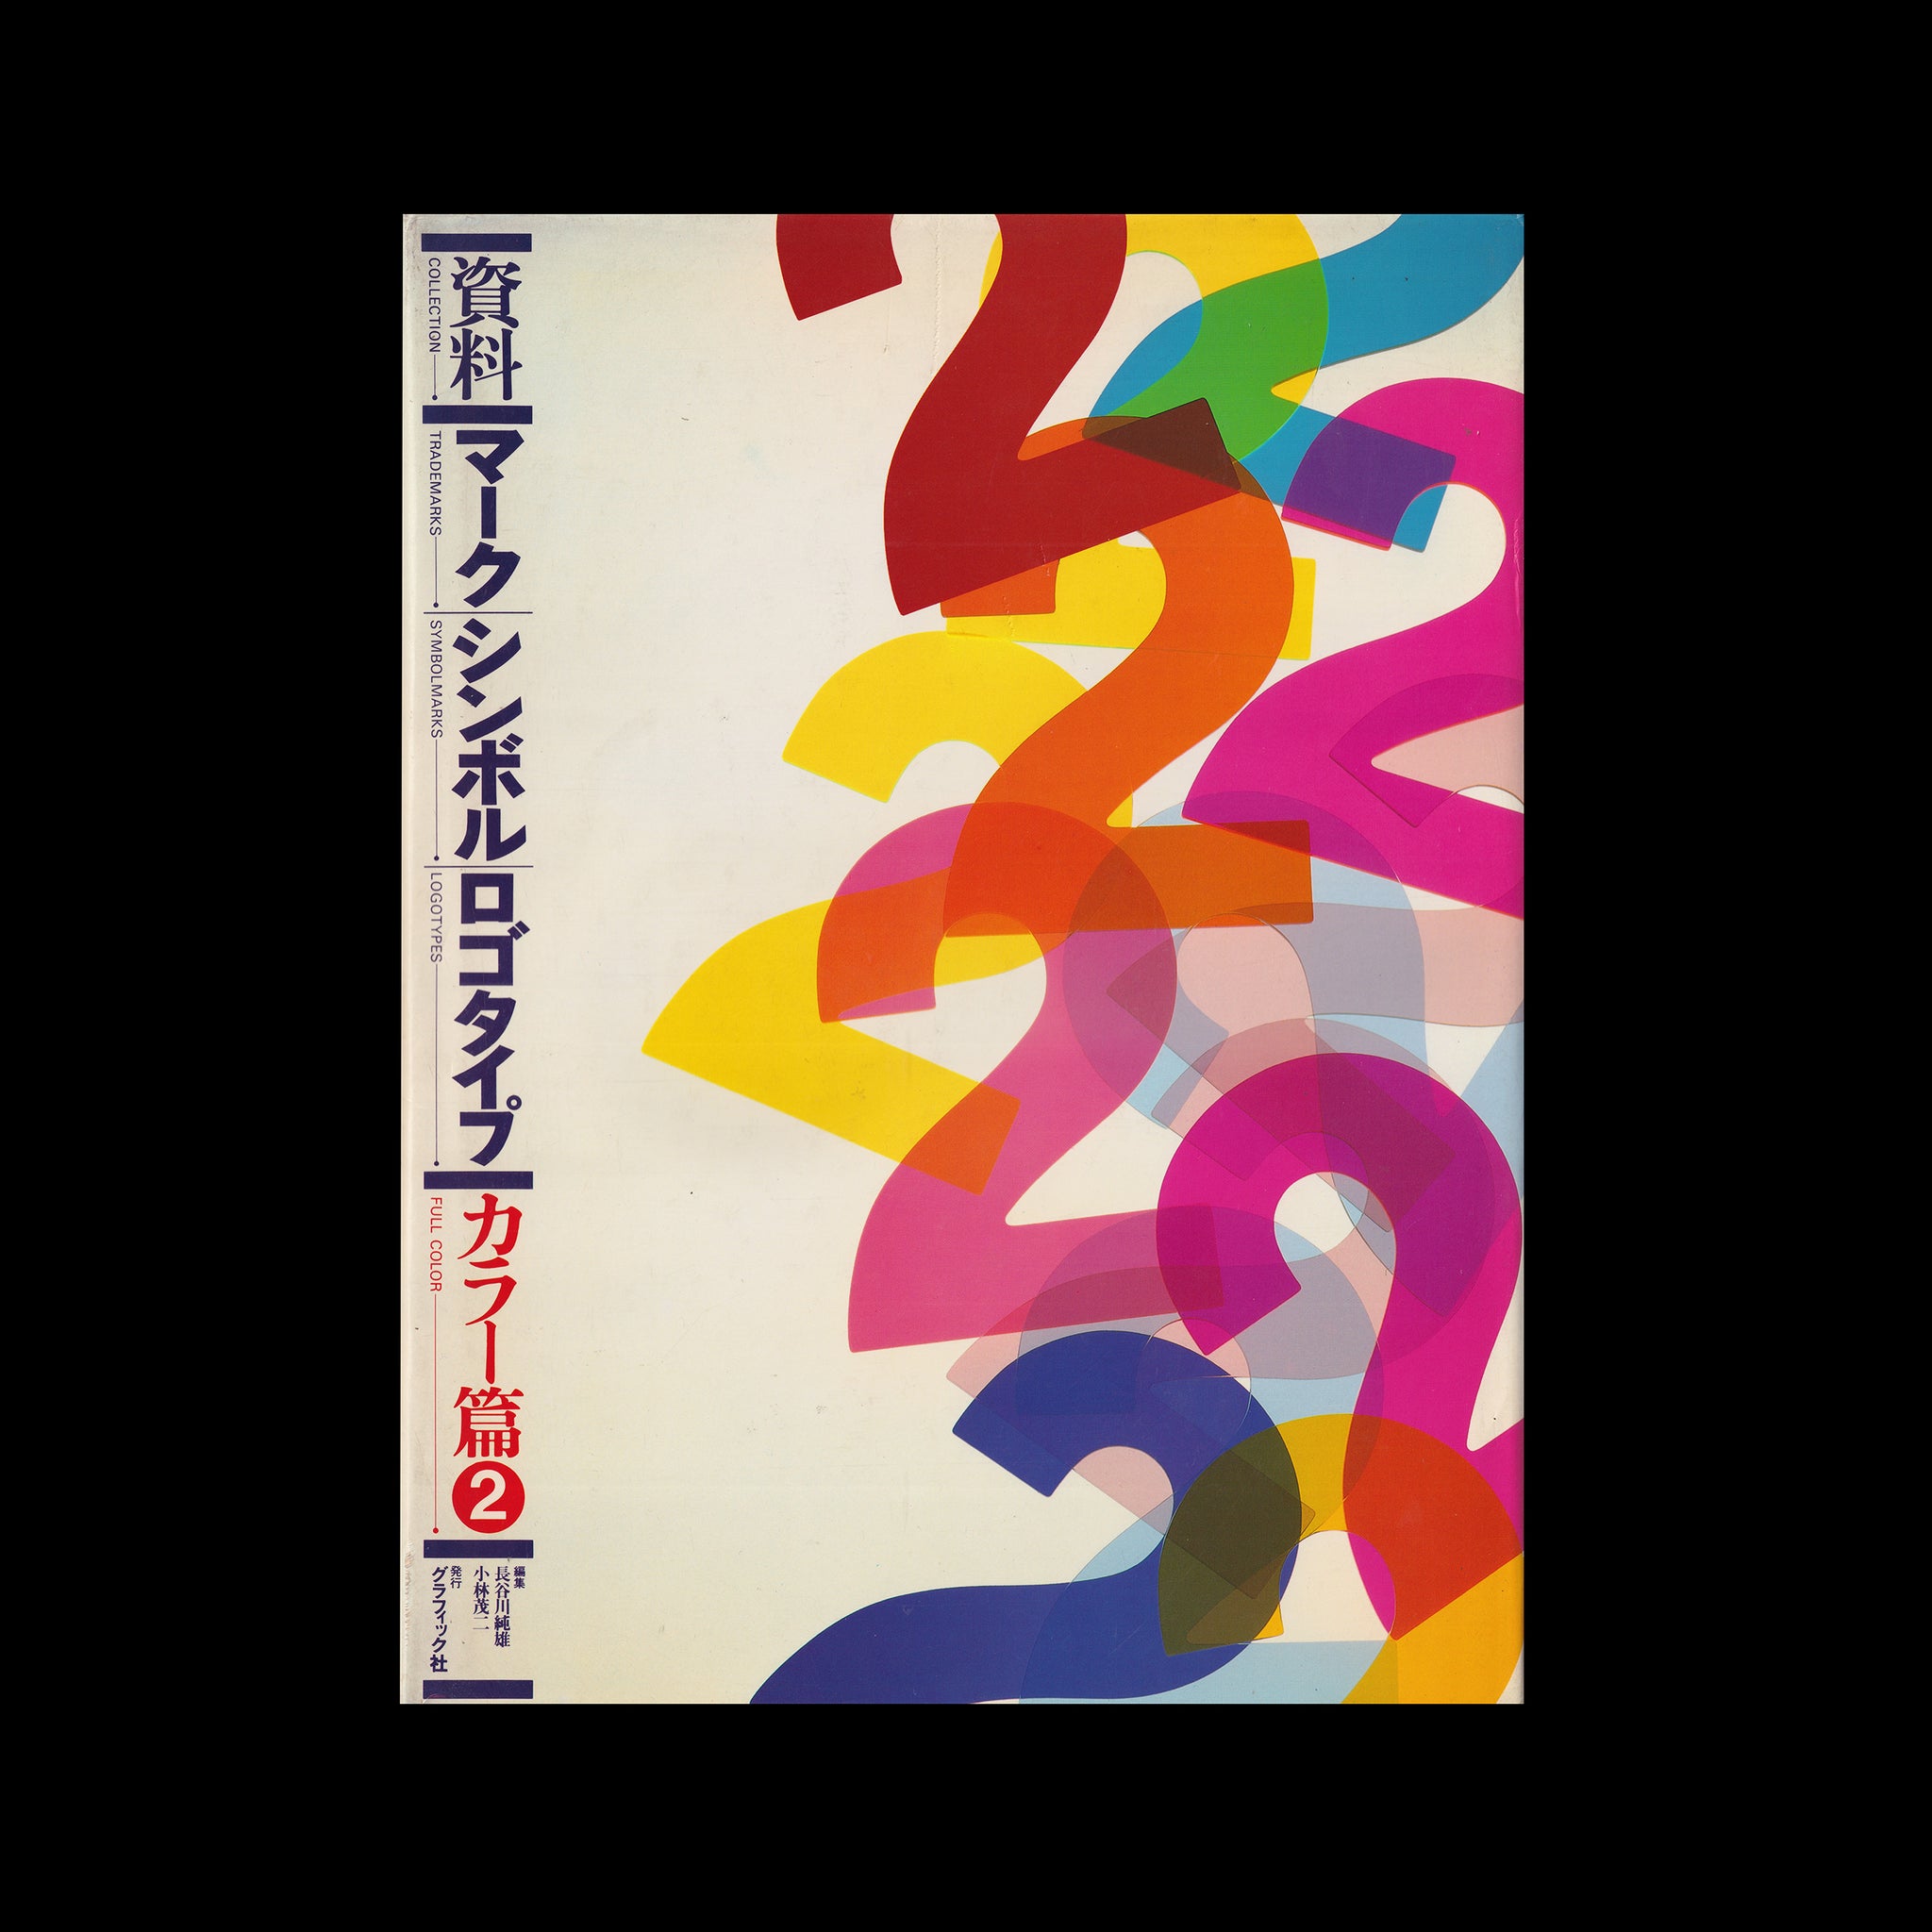 Japan's Trademarks and Logotypes in Full Colour Part 2, 1985